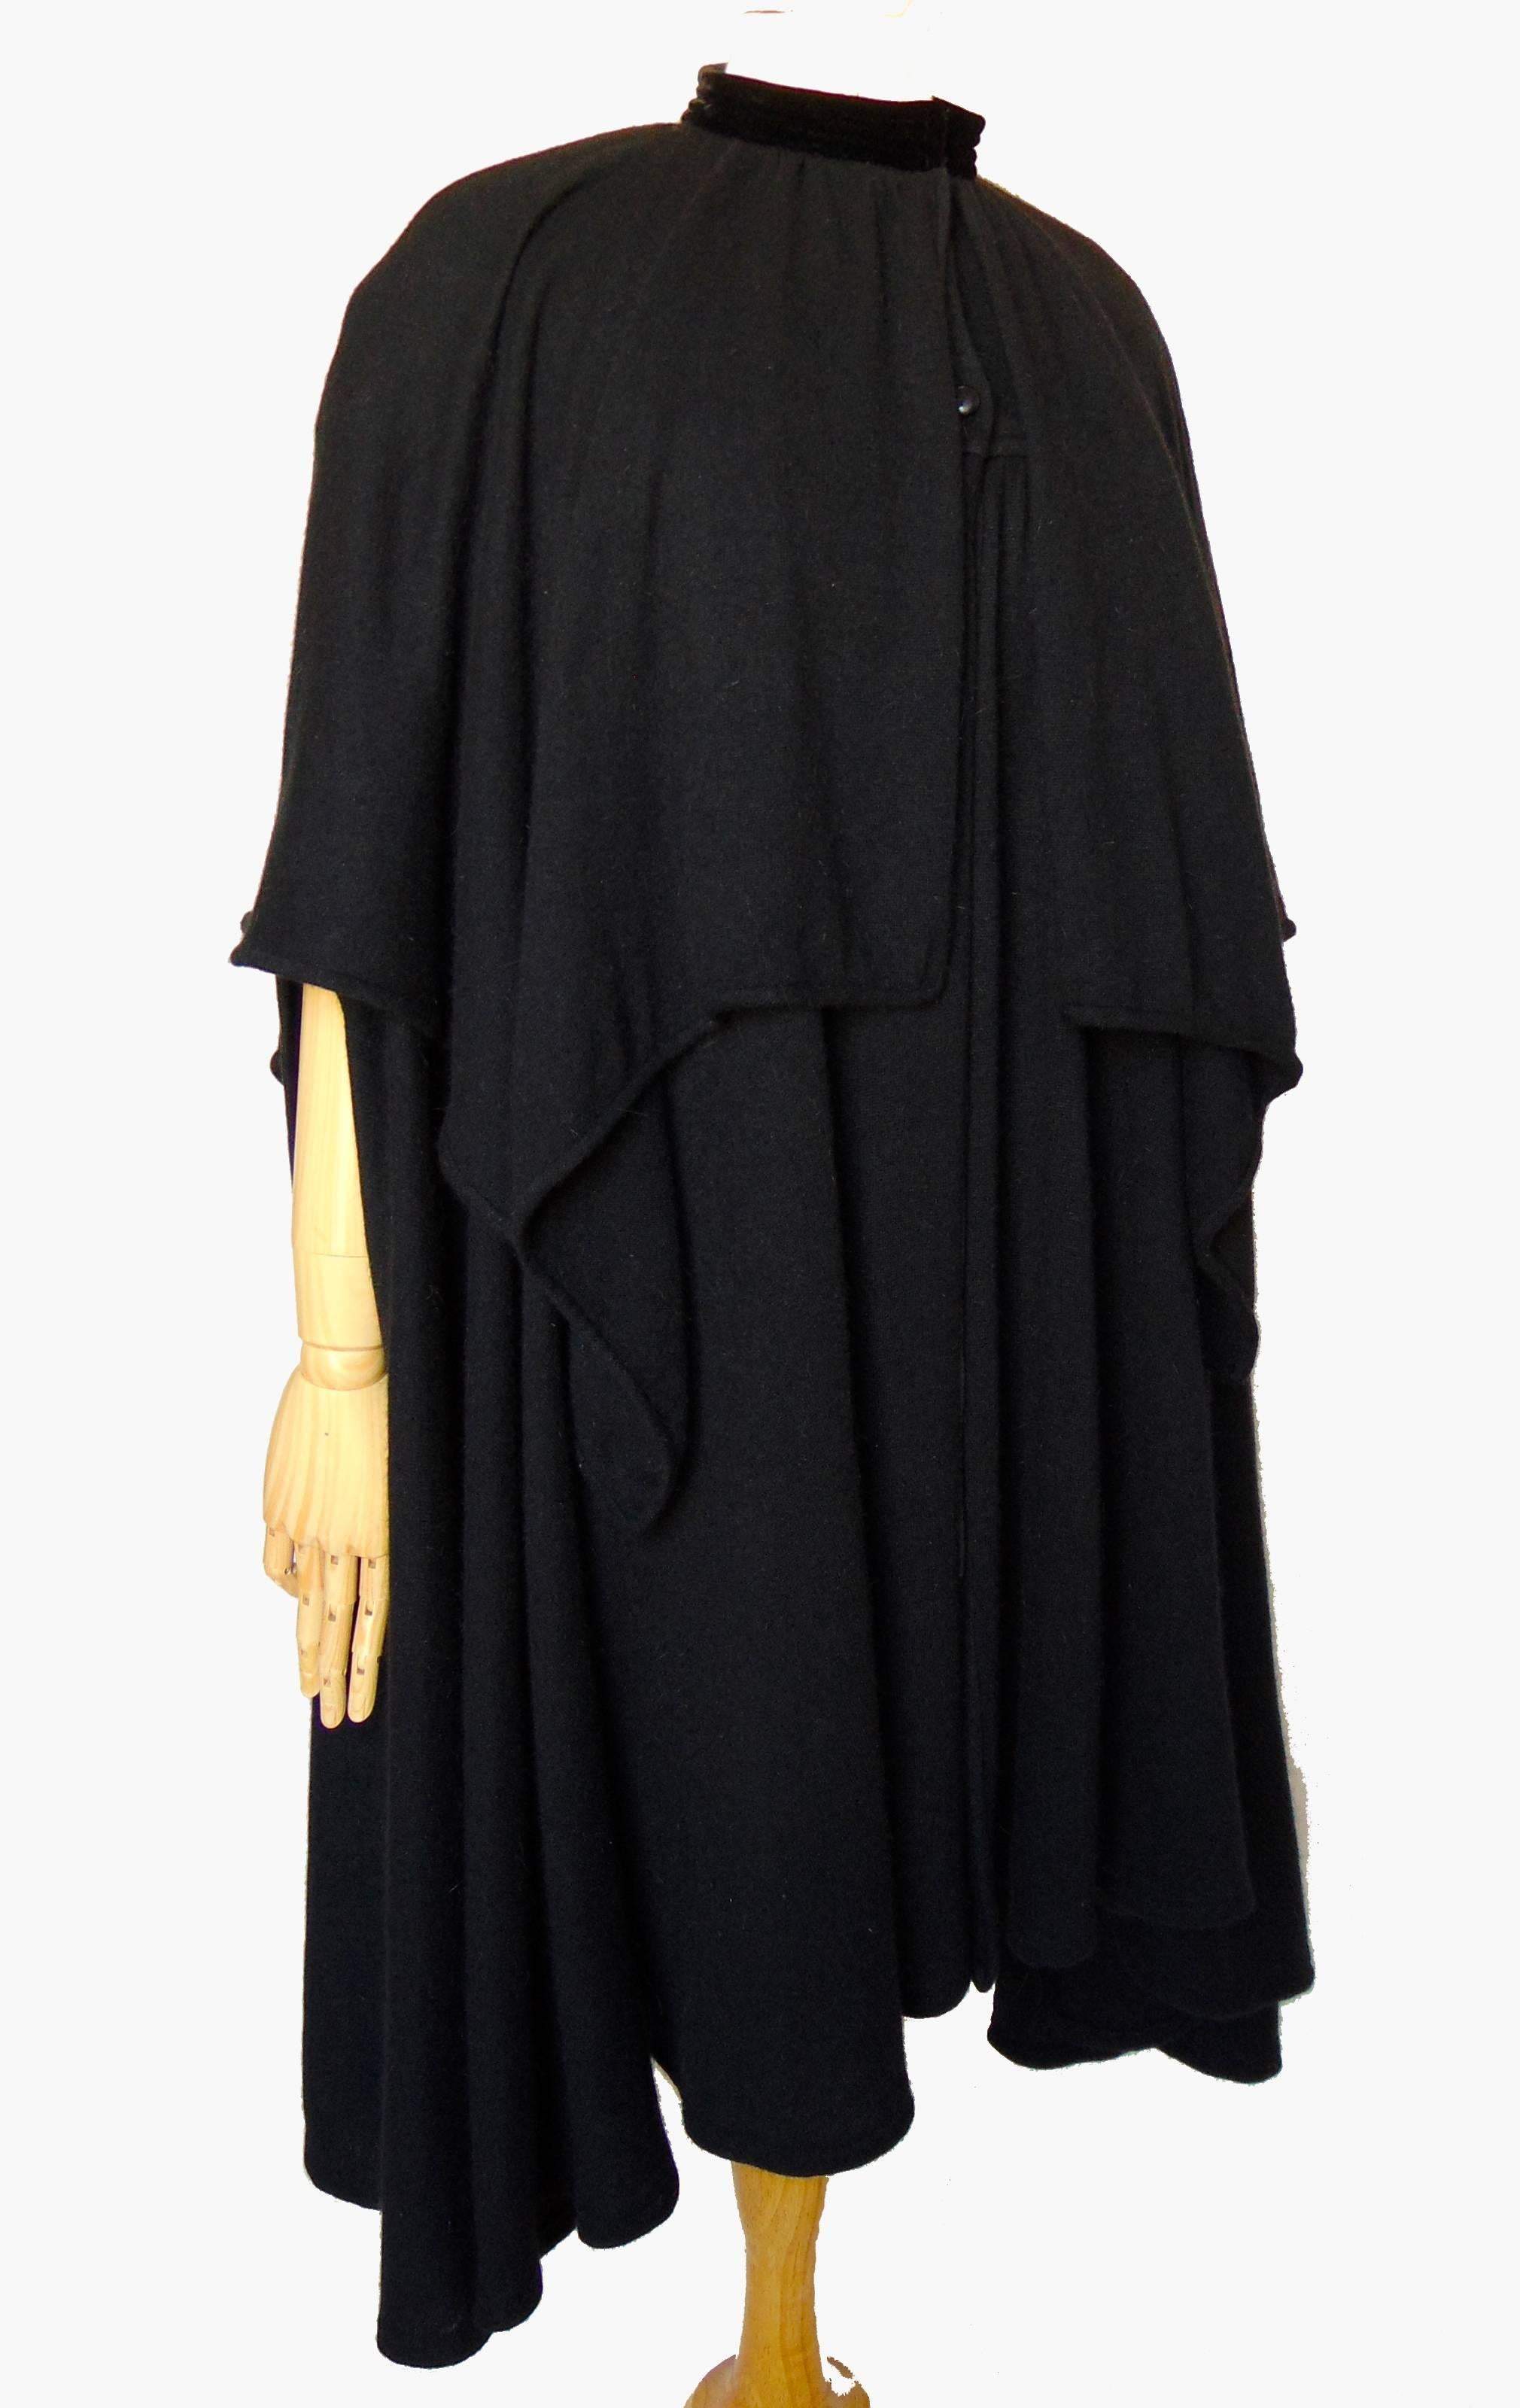 Valentino Cape Black Angora Wool Knit High Collar Caplet Vintage 1980s OSFM In Good Condition For Sale In Port Saint Lucie, FL